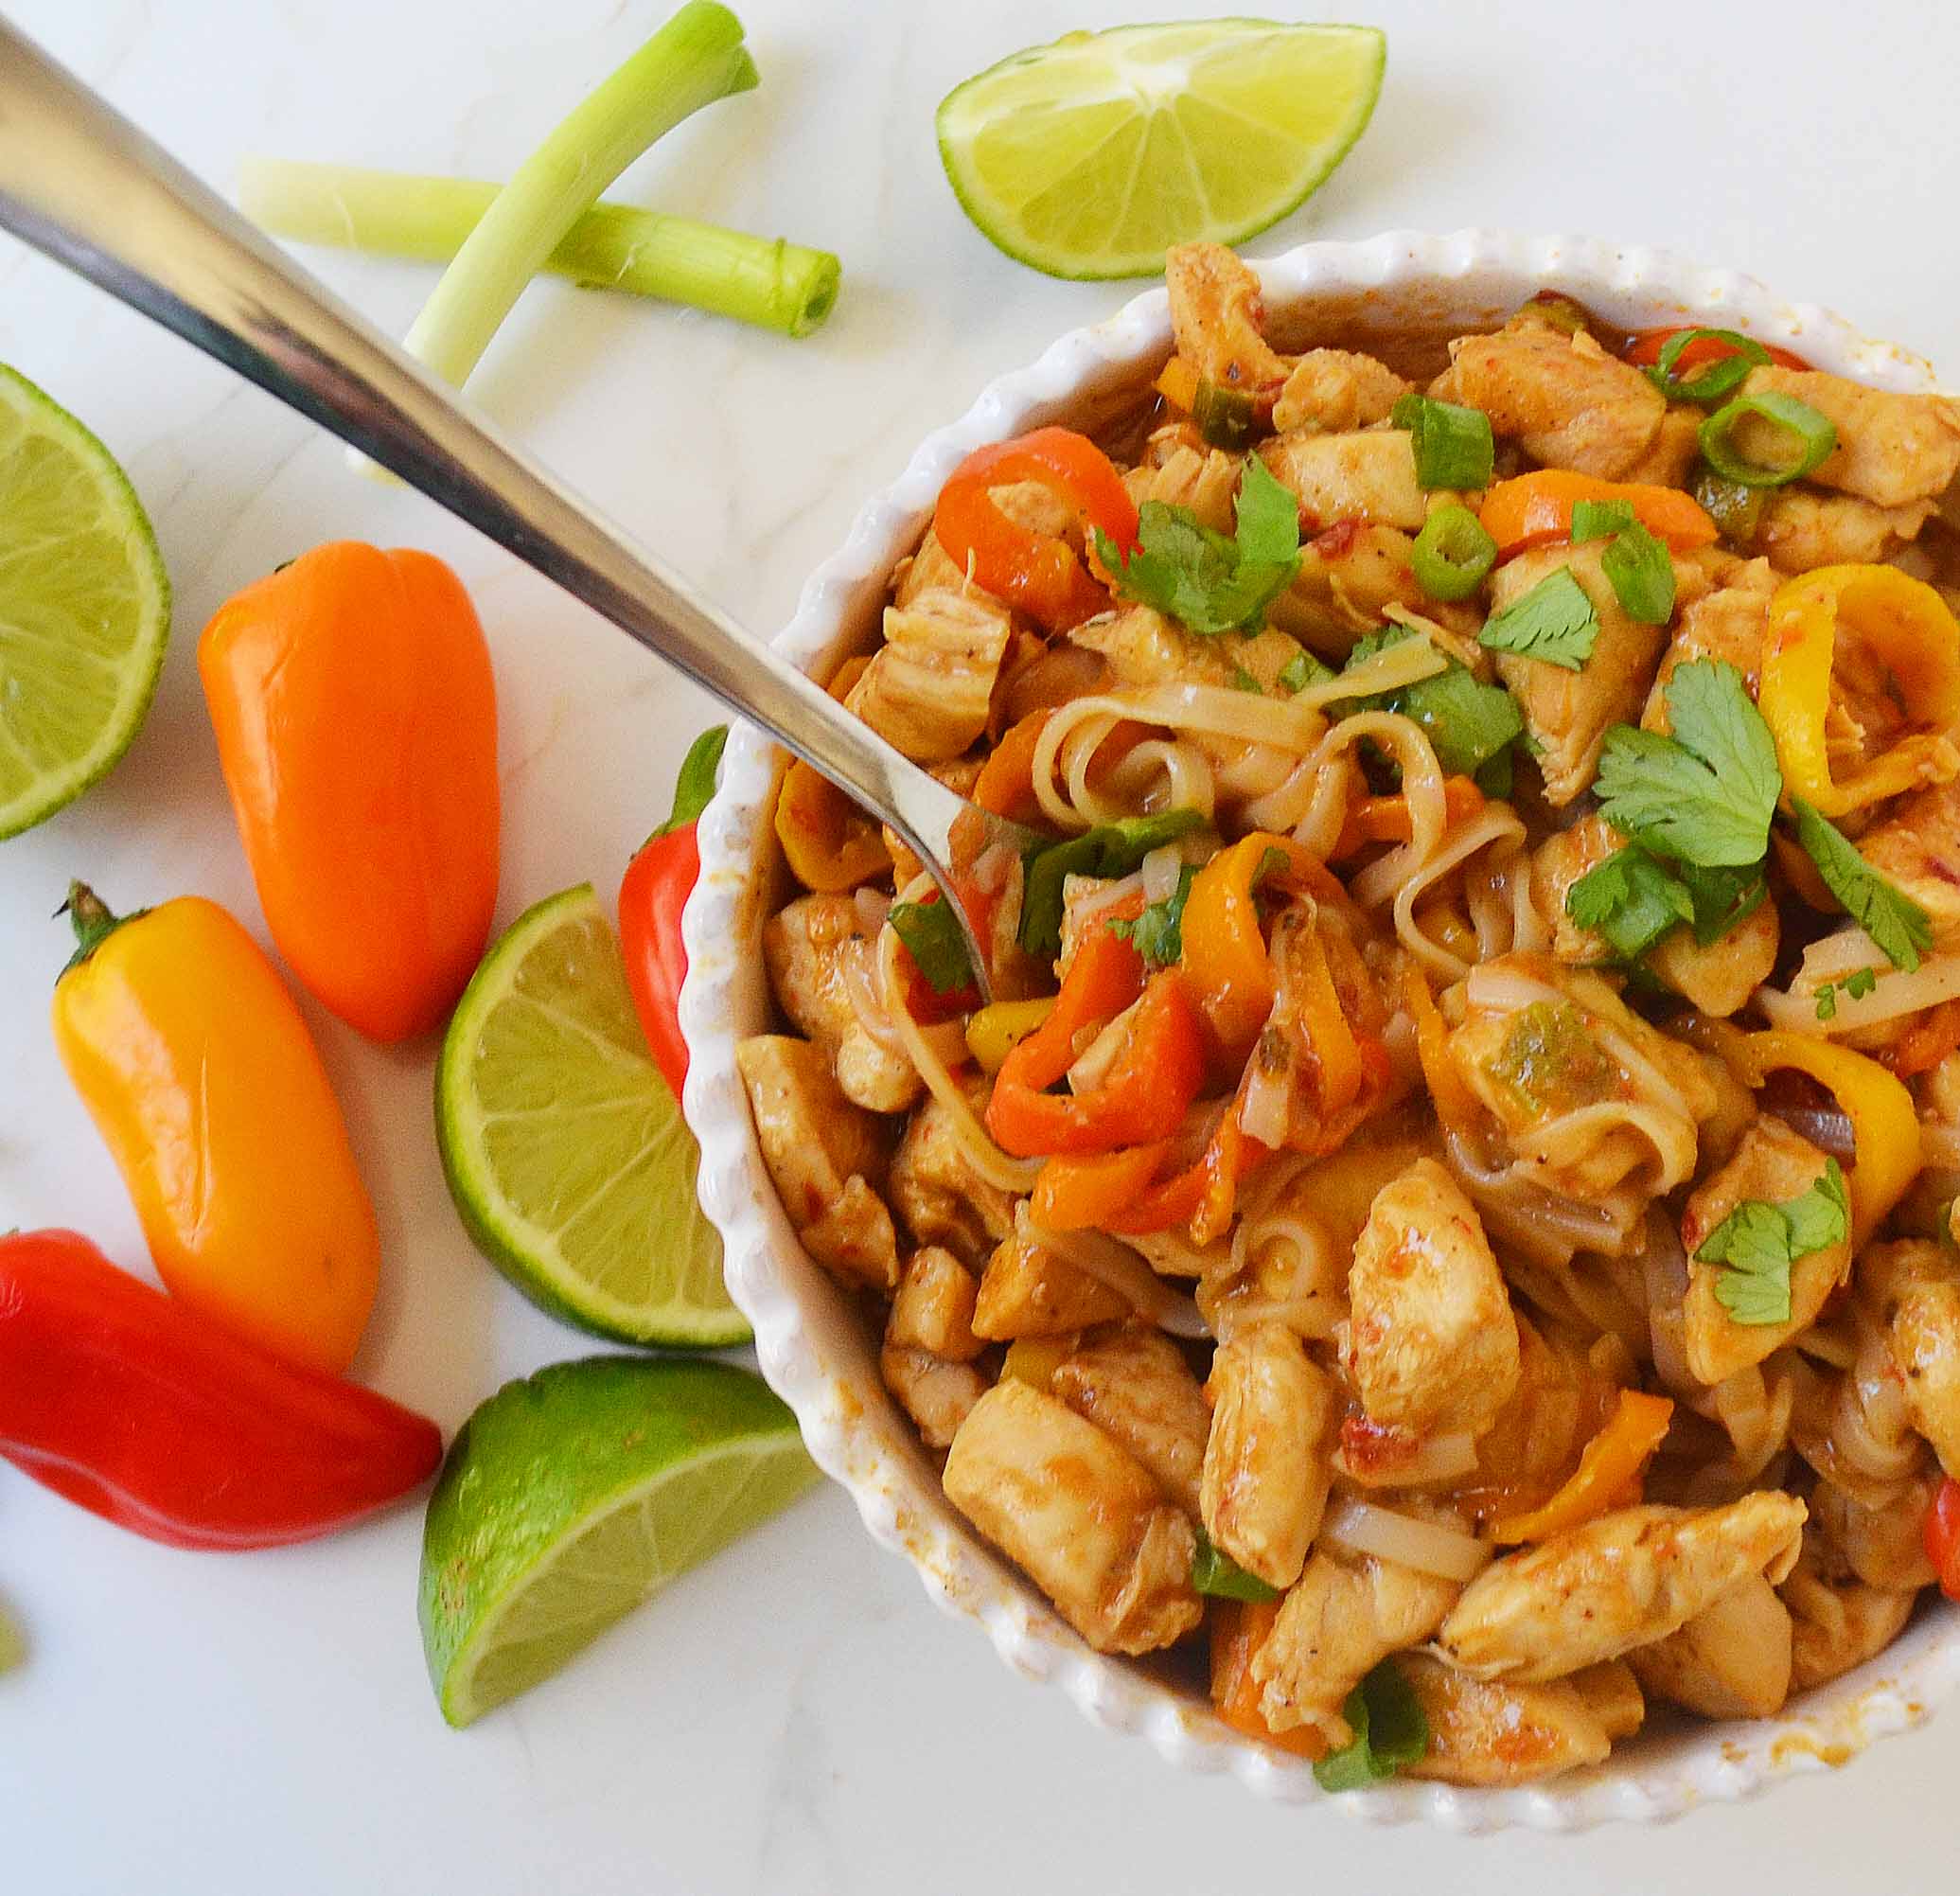 Thai Chicken Noodles by Modern Honey. Gluten-free and dairy-free dinner made in less than 30 minutes. www.modernhoney.com